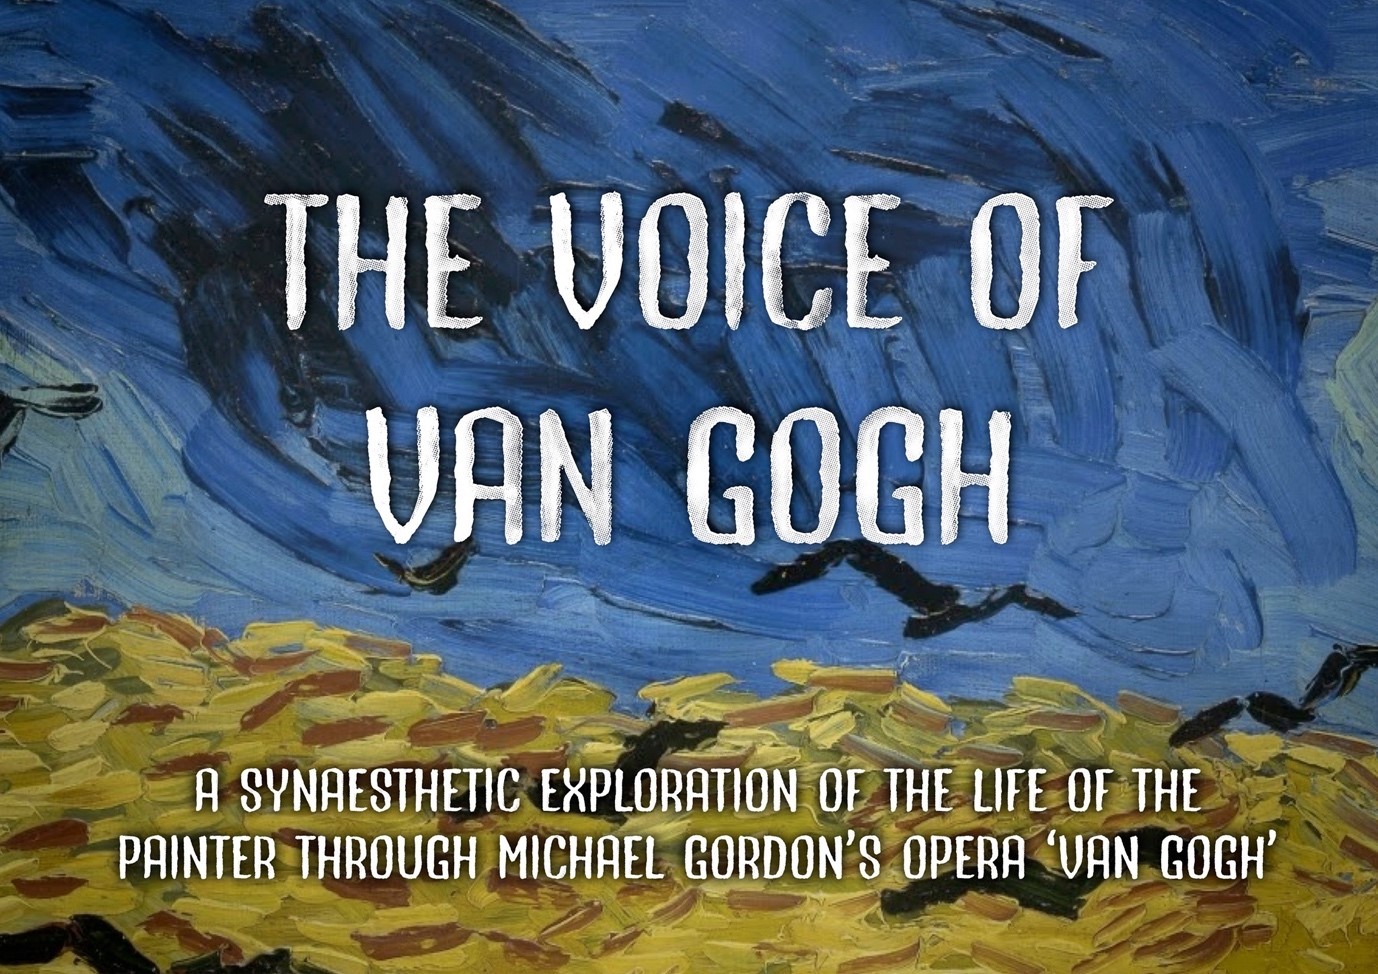 The Voice of Van Gogh: a synaesthetic exploration of the life of the painter through Michael Gordon’s opera “Van Gogh”